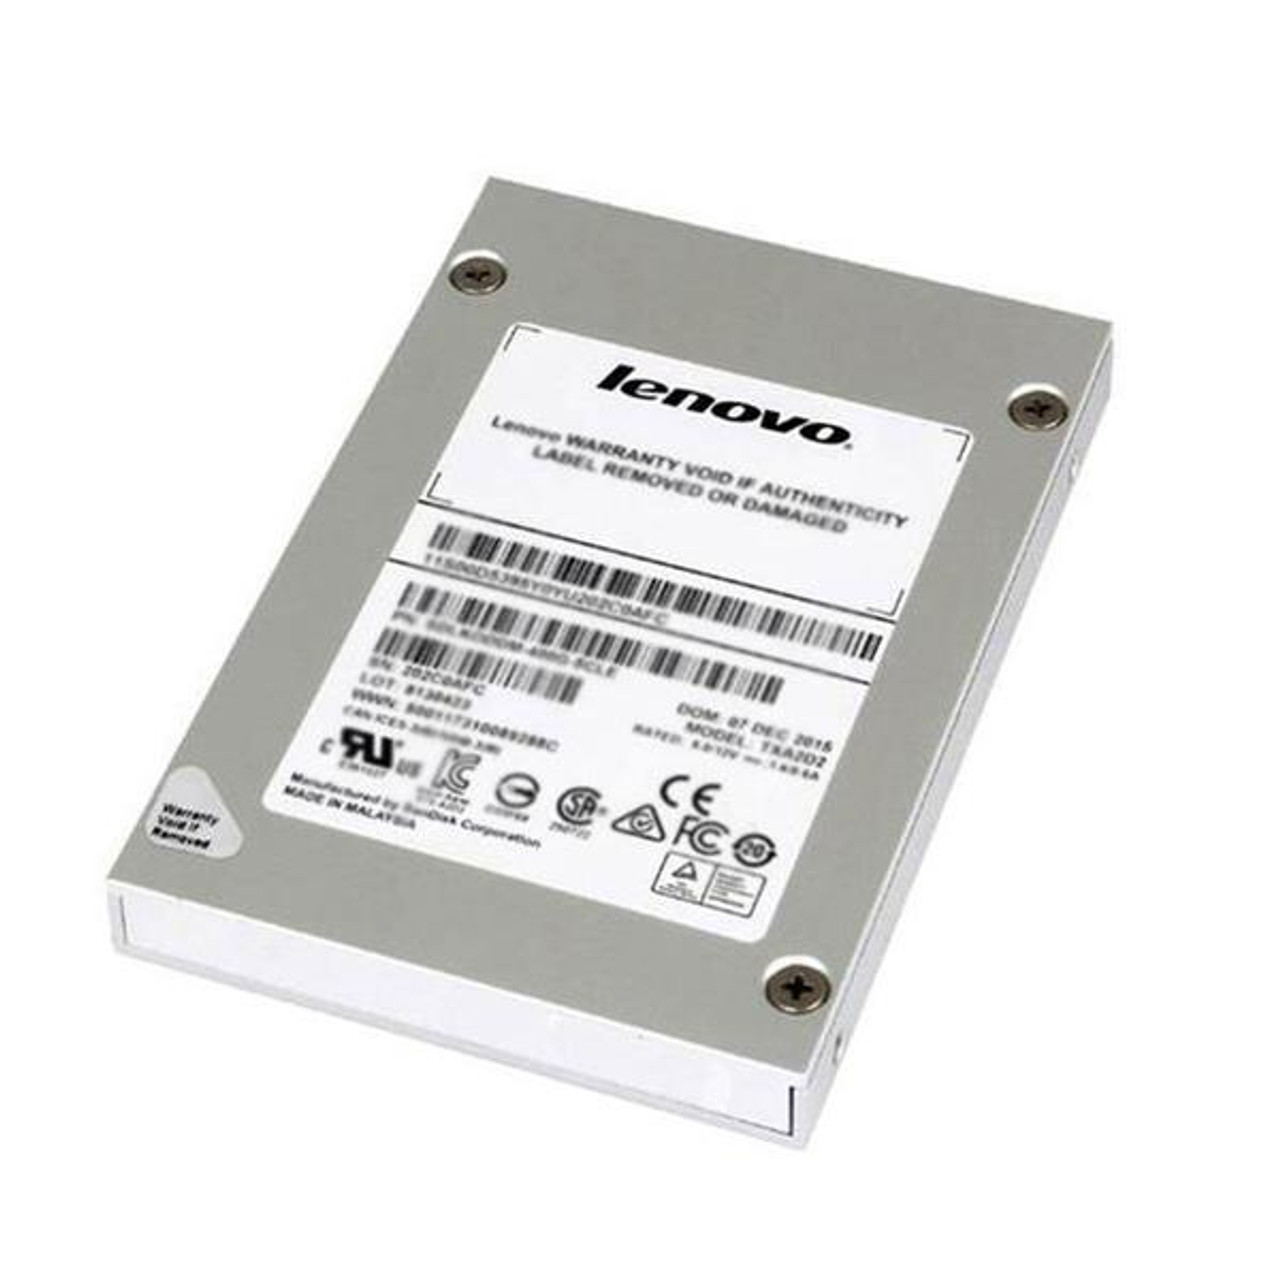 0E38447 Lenovo 256GB MLC SATA 6Gbps 2.5-inch Internal Solid State Drive (SSD) for ThinkStation P300